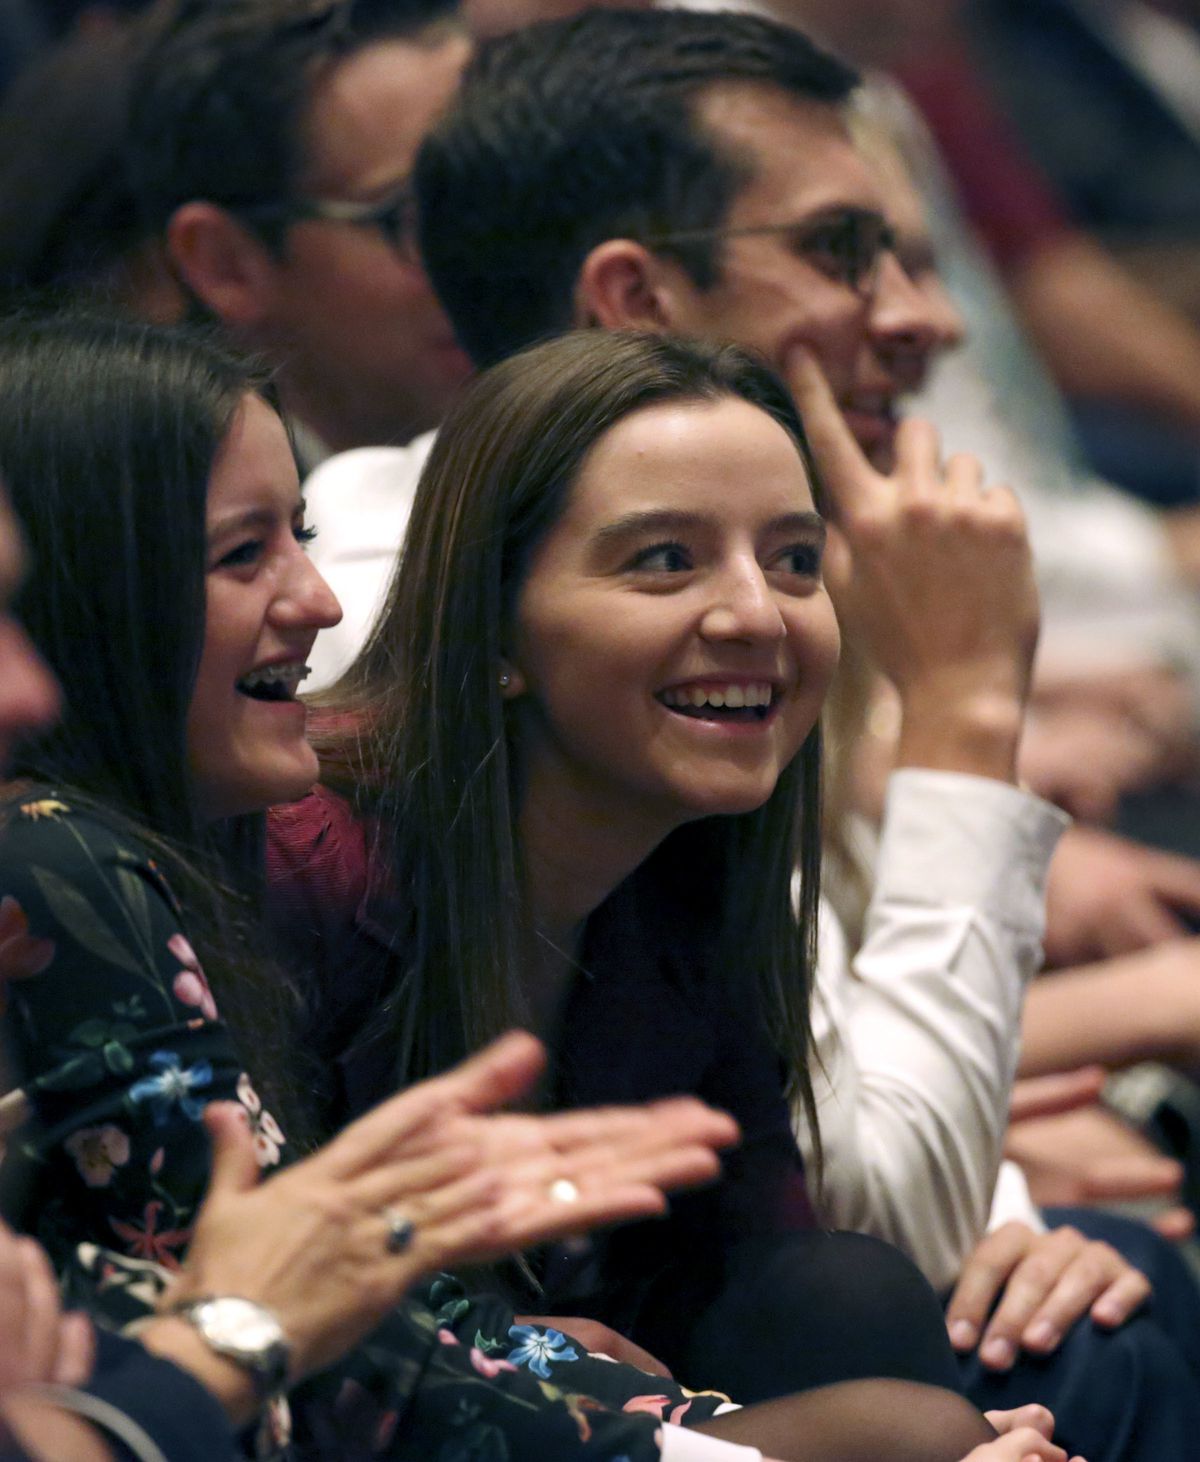 Conferencegoers react to the announcement of 12 new temples during the Sunday afternoon session of the 188th Semiannual General Conference of The Church of Jesus Christ of Latter-day Saints in the Conference Center in downtown Salt Lake City on Sunday, Oc